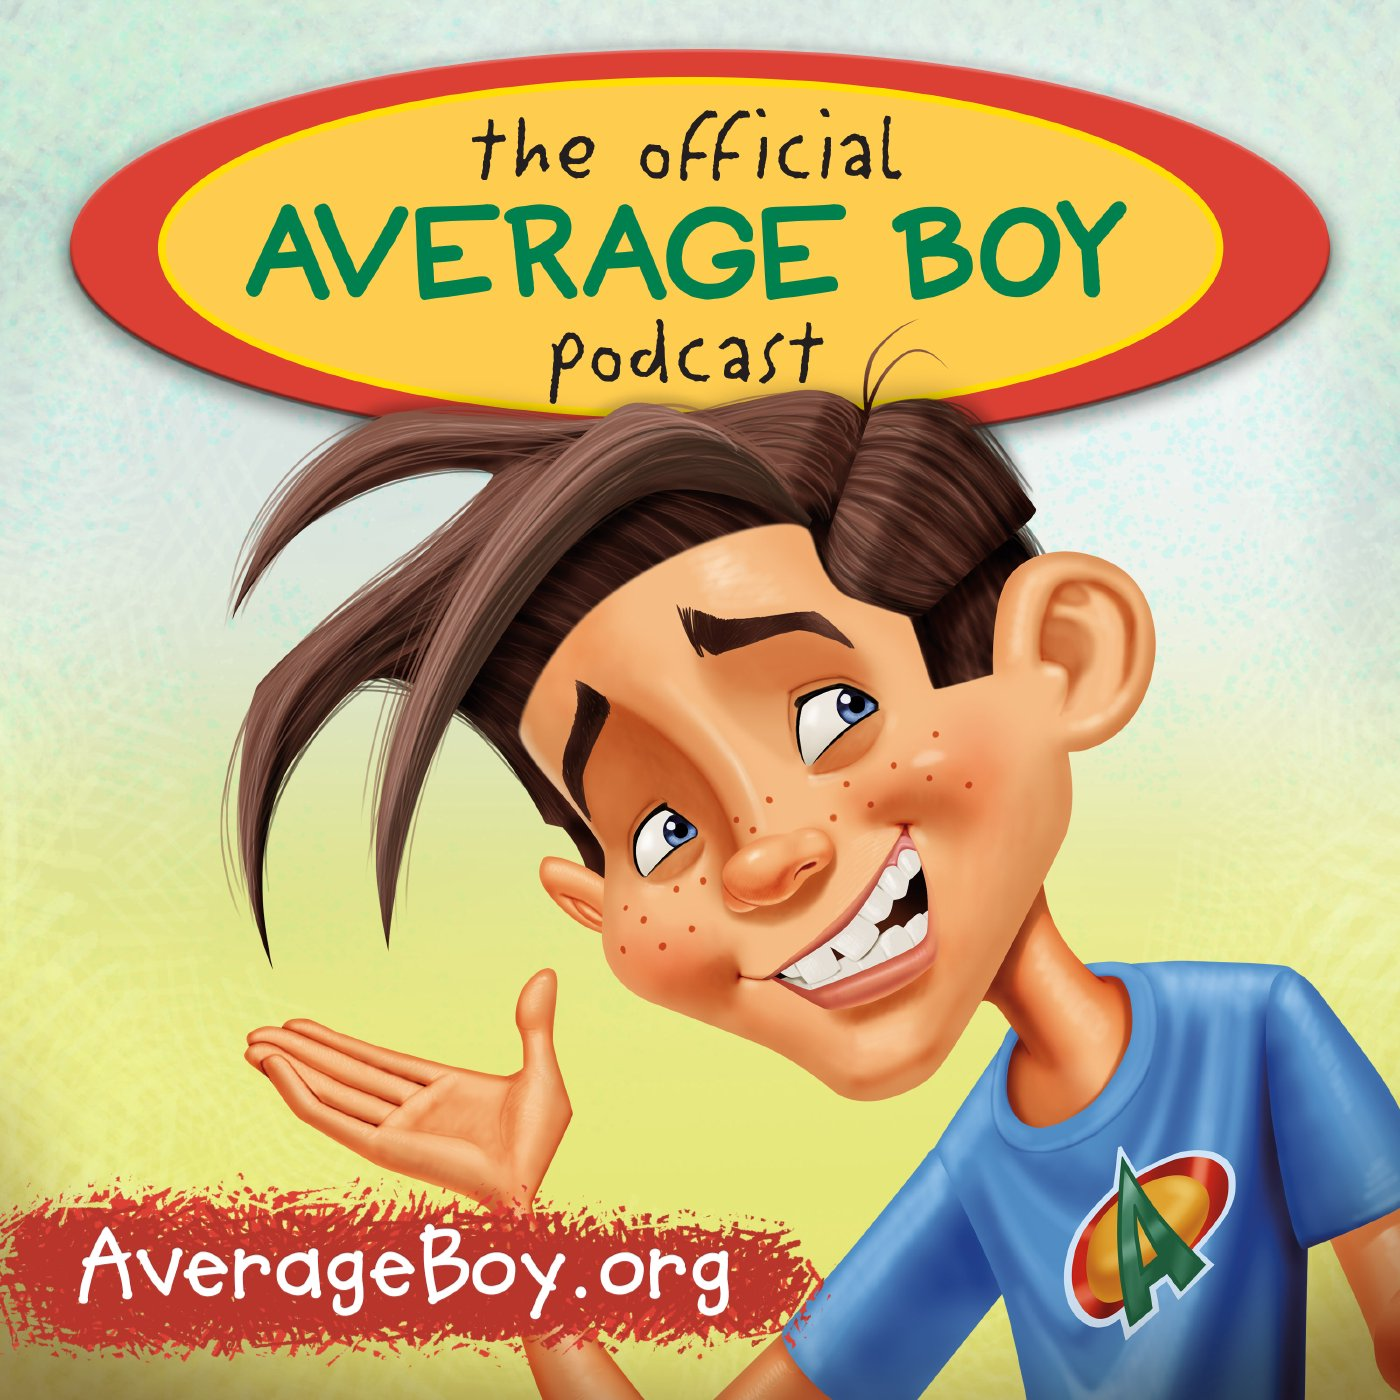 The Official Average Boy Podcast #29 on Patience